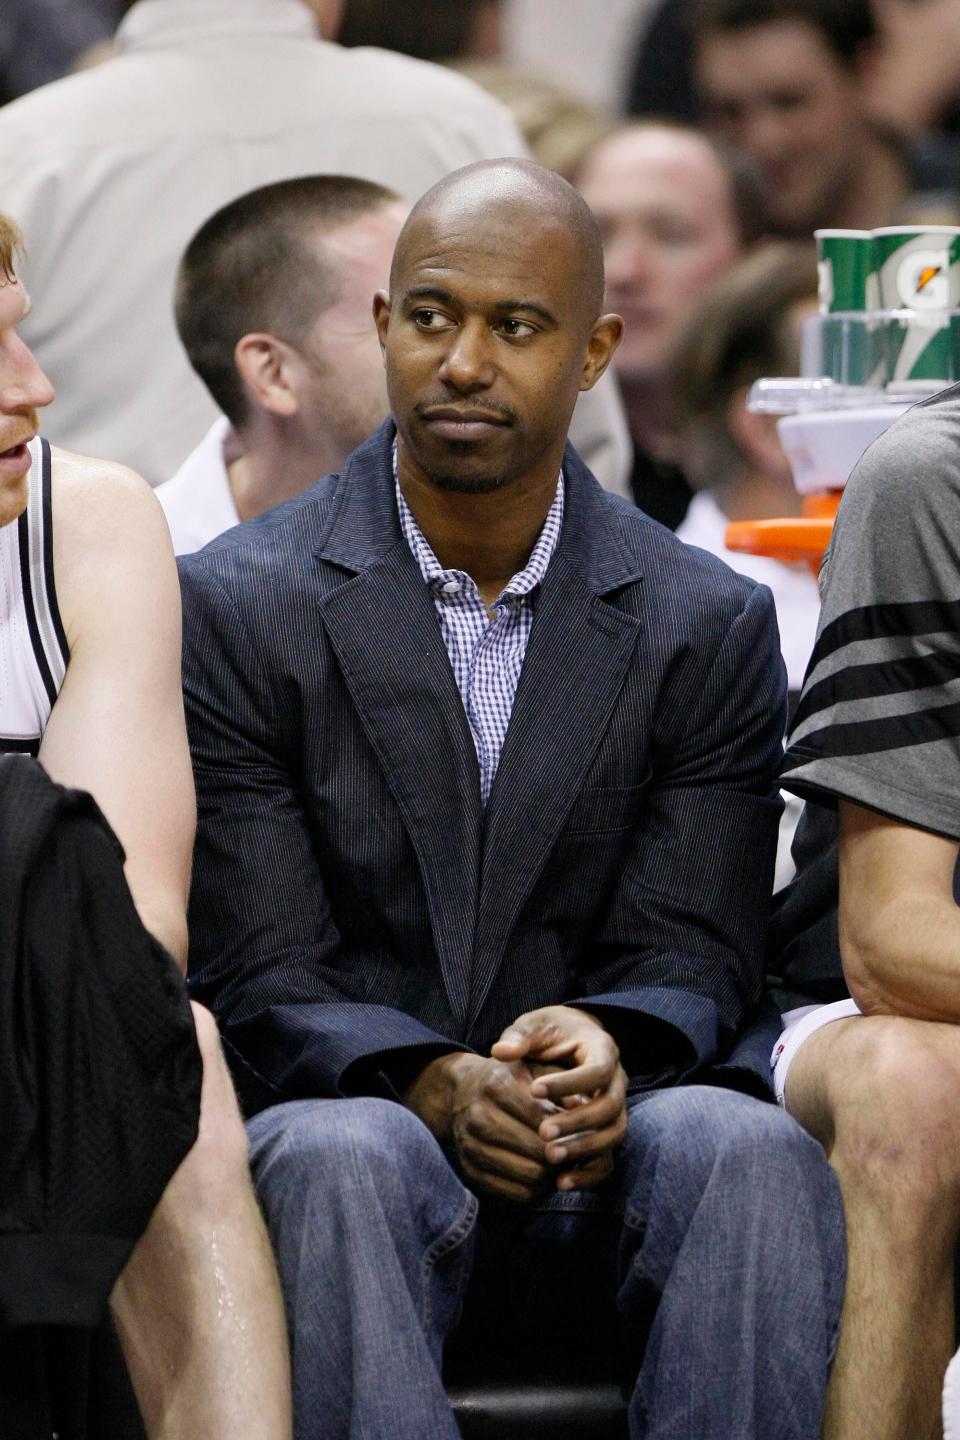 Then-Spurs guard T.J. Ford watches from the bench during a 2012 game. Ford, who led Texas to the 2003 Final Four, played with San Antonio briefly before retiring but considers the NBA franchise his family. He was honored Thursday night during the Spurs' game at Moody Center.